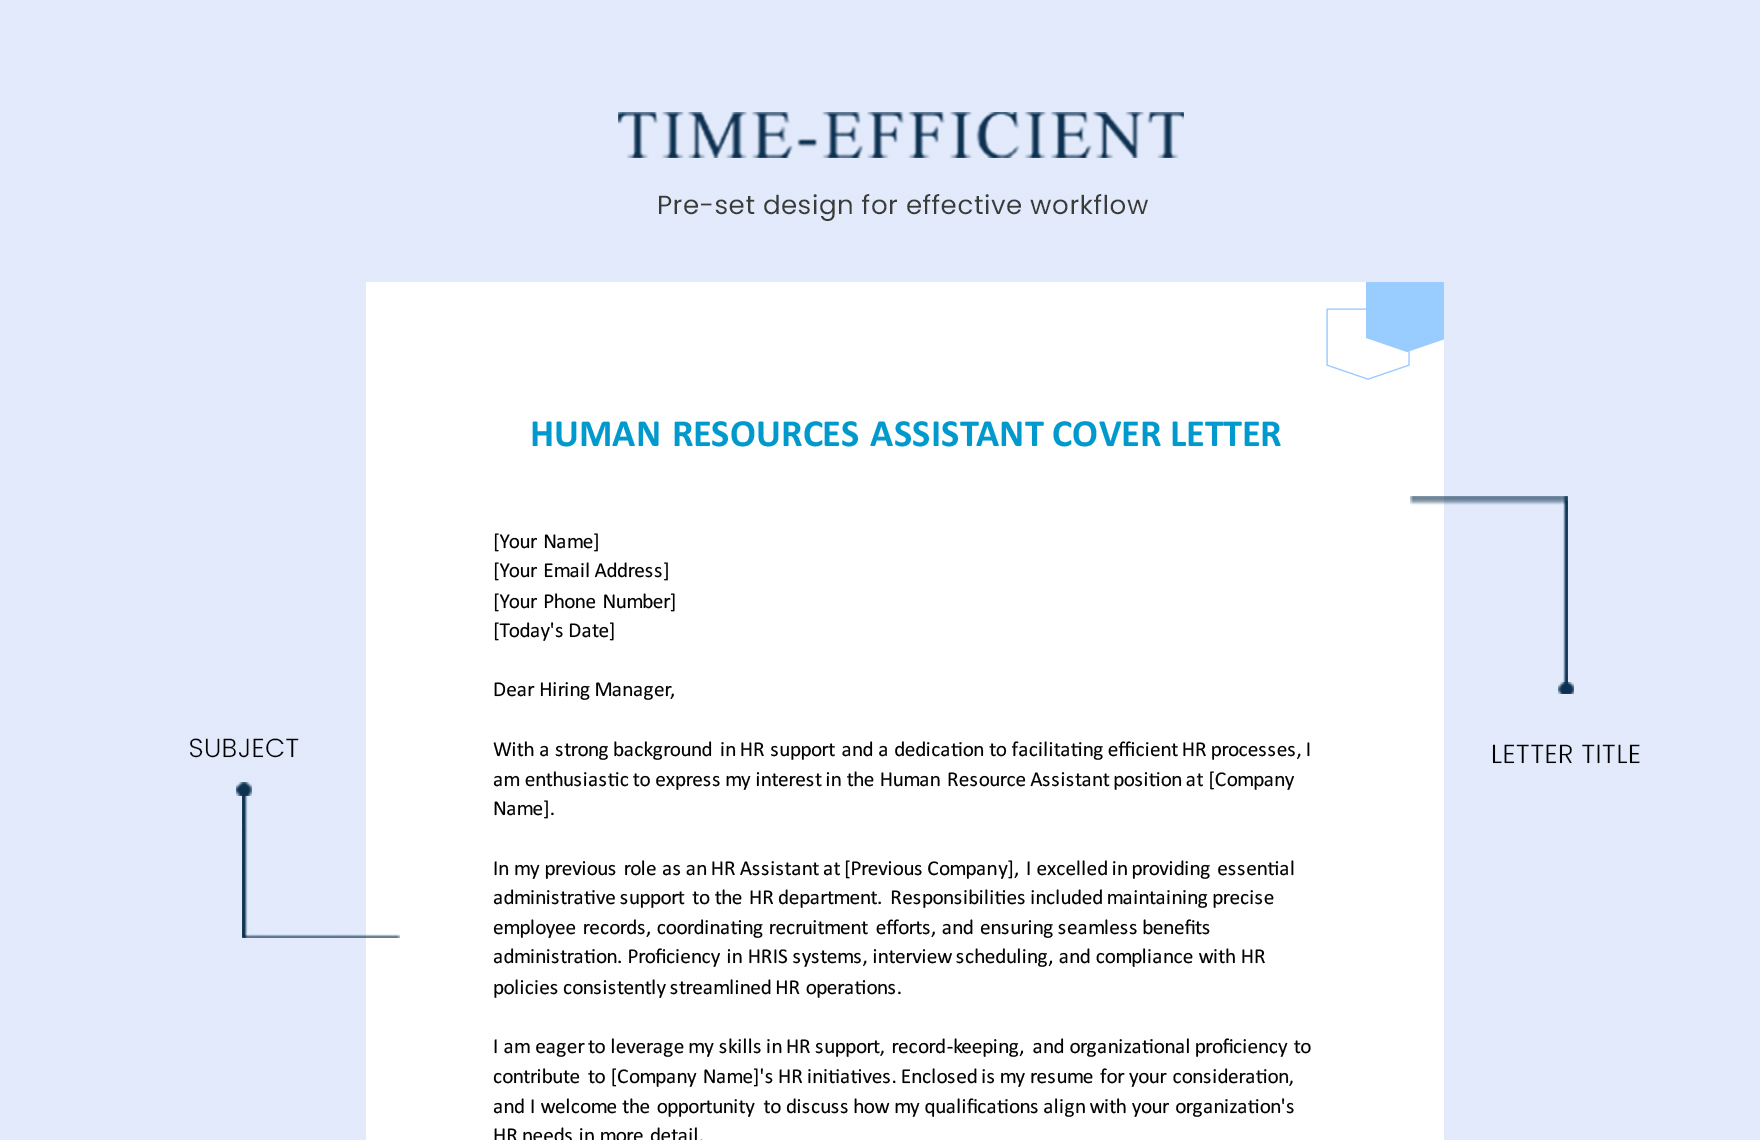 Human Resource Assistant Cover Letter